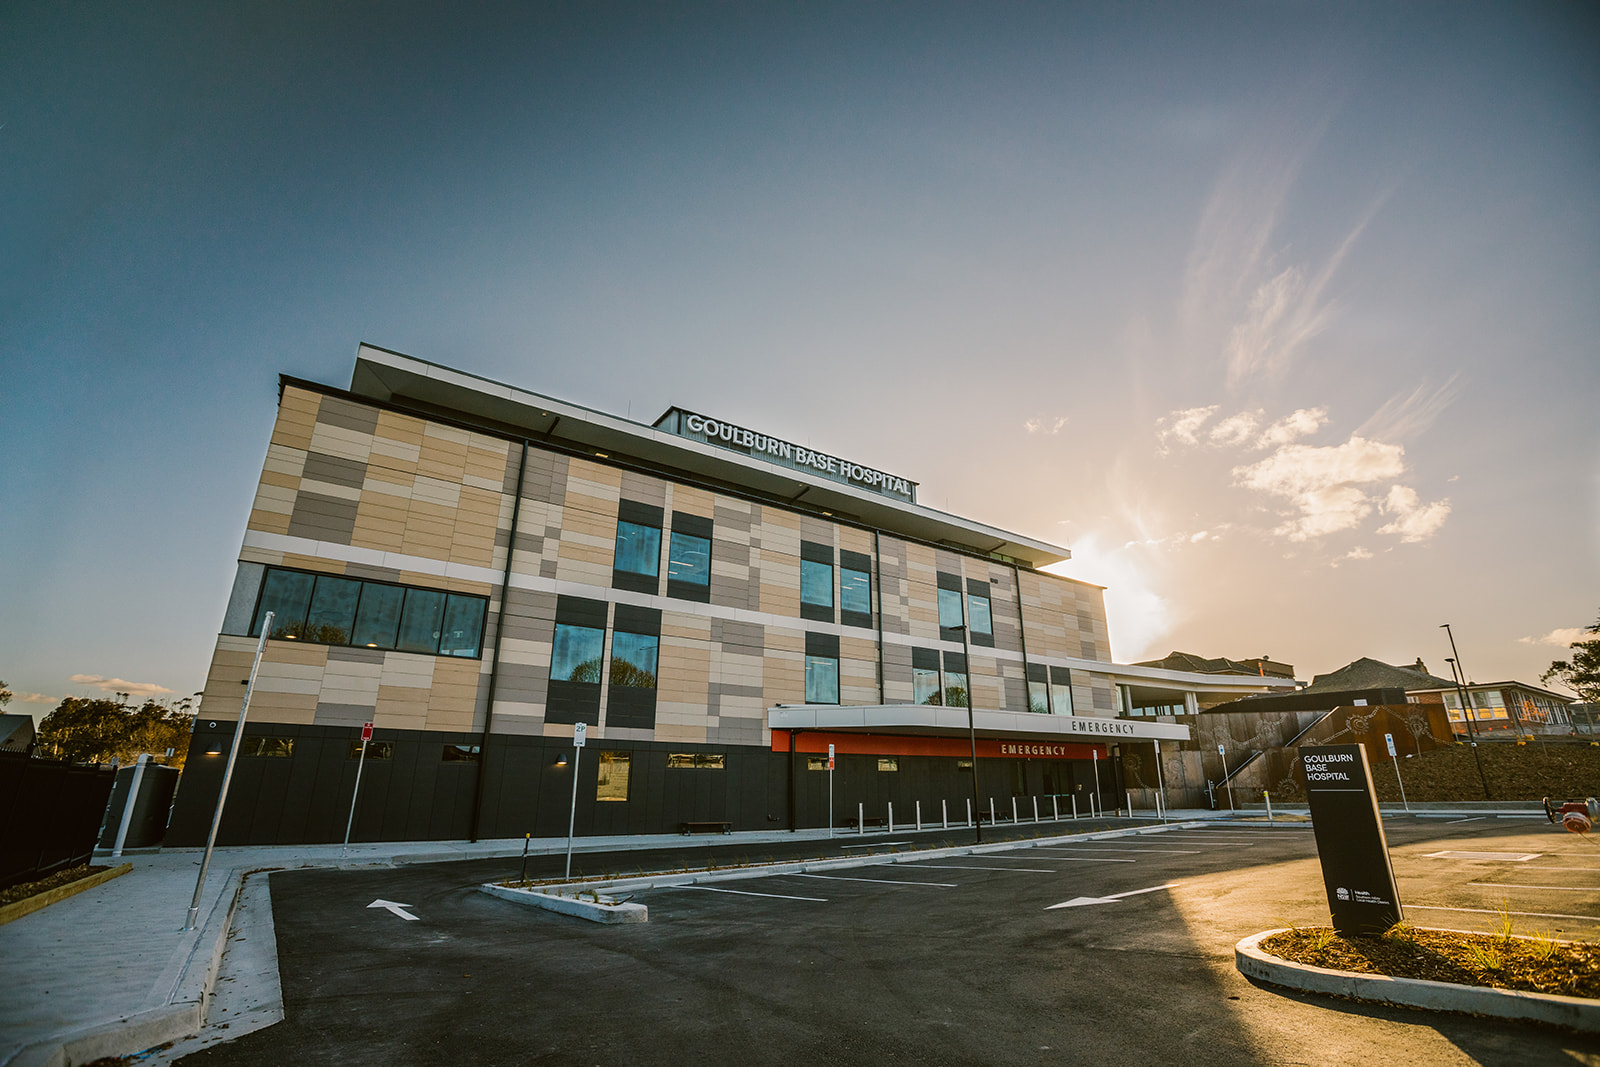 New Clinical Services Building at Goulburn Base Hospital officially opens